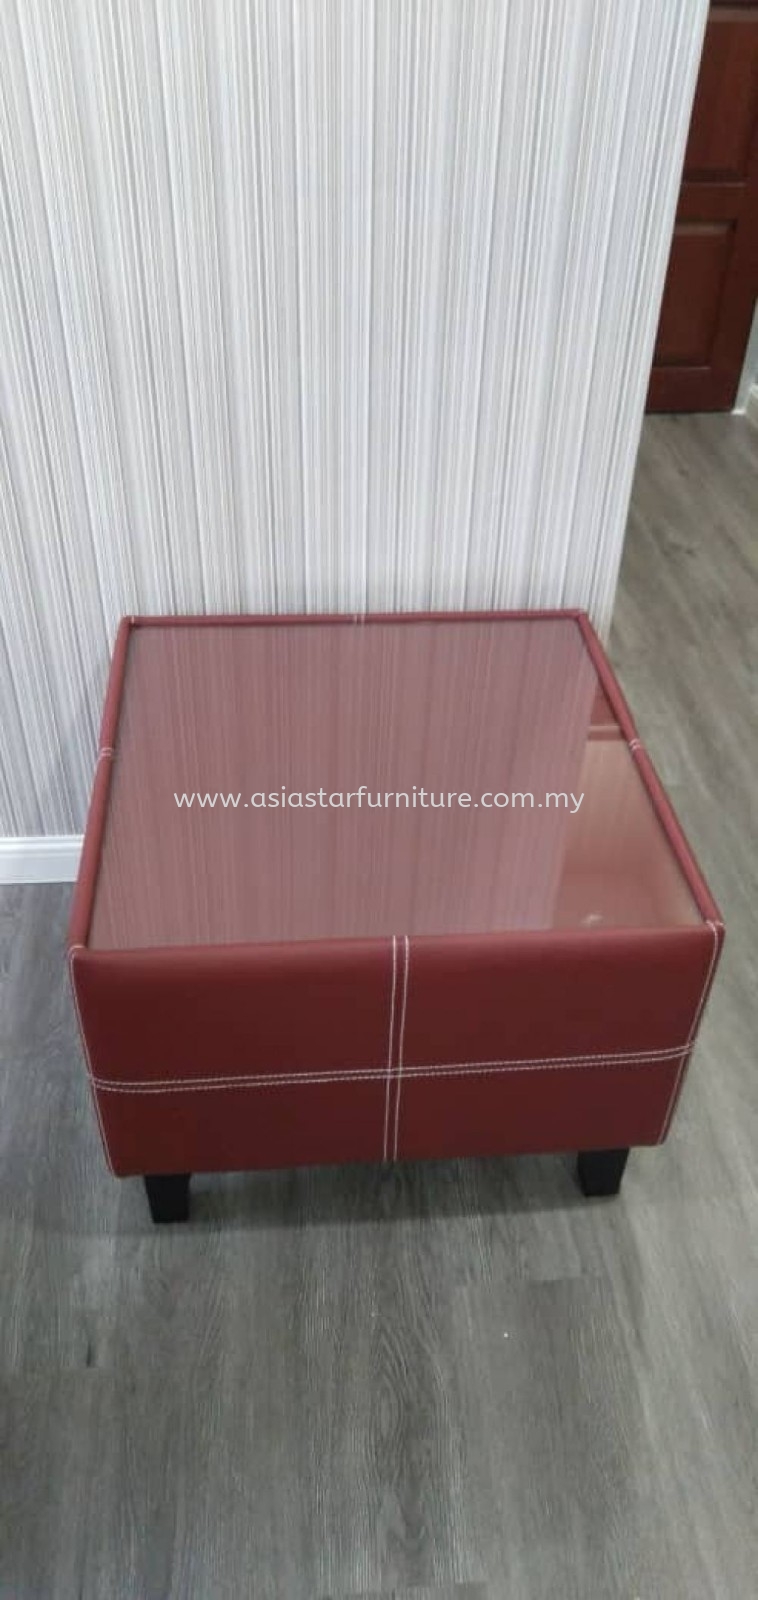 DELIVERY & INSTALLATION CAMELIA OFFICE SQUARE COFFEE TABLE OFFICE FURNITURE SS15, SUBANG JAYA